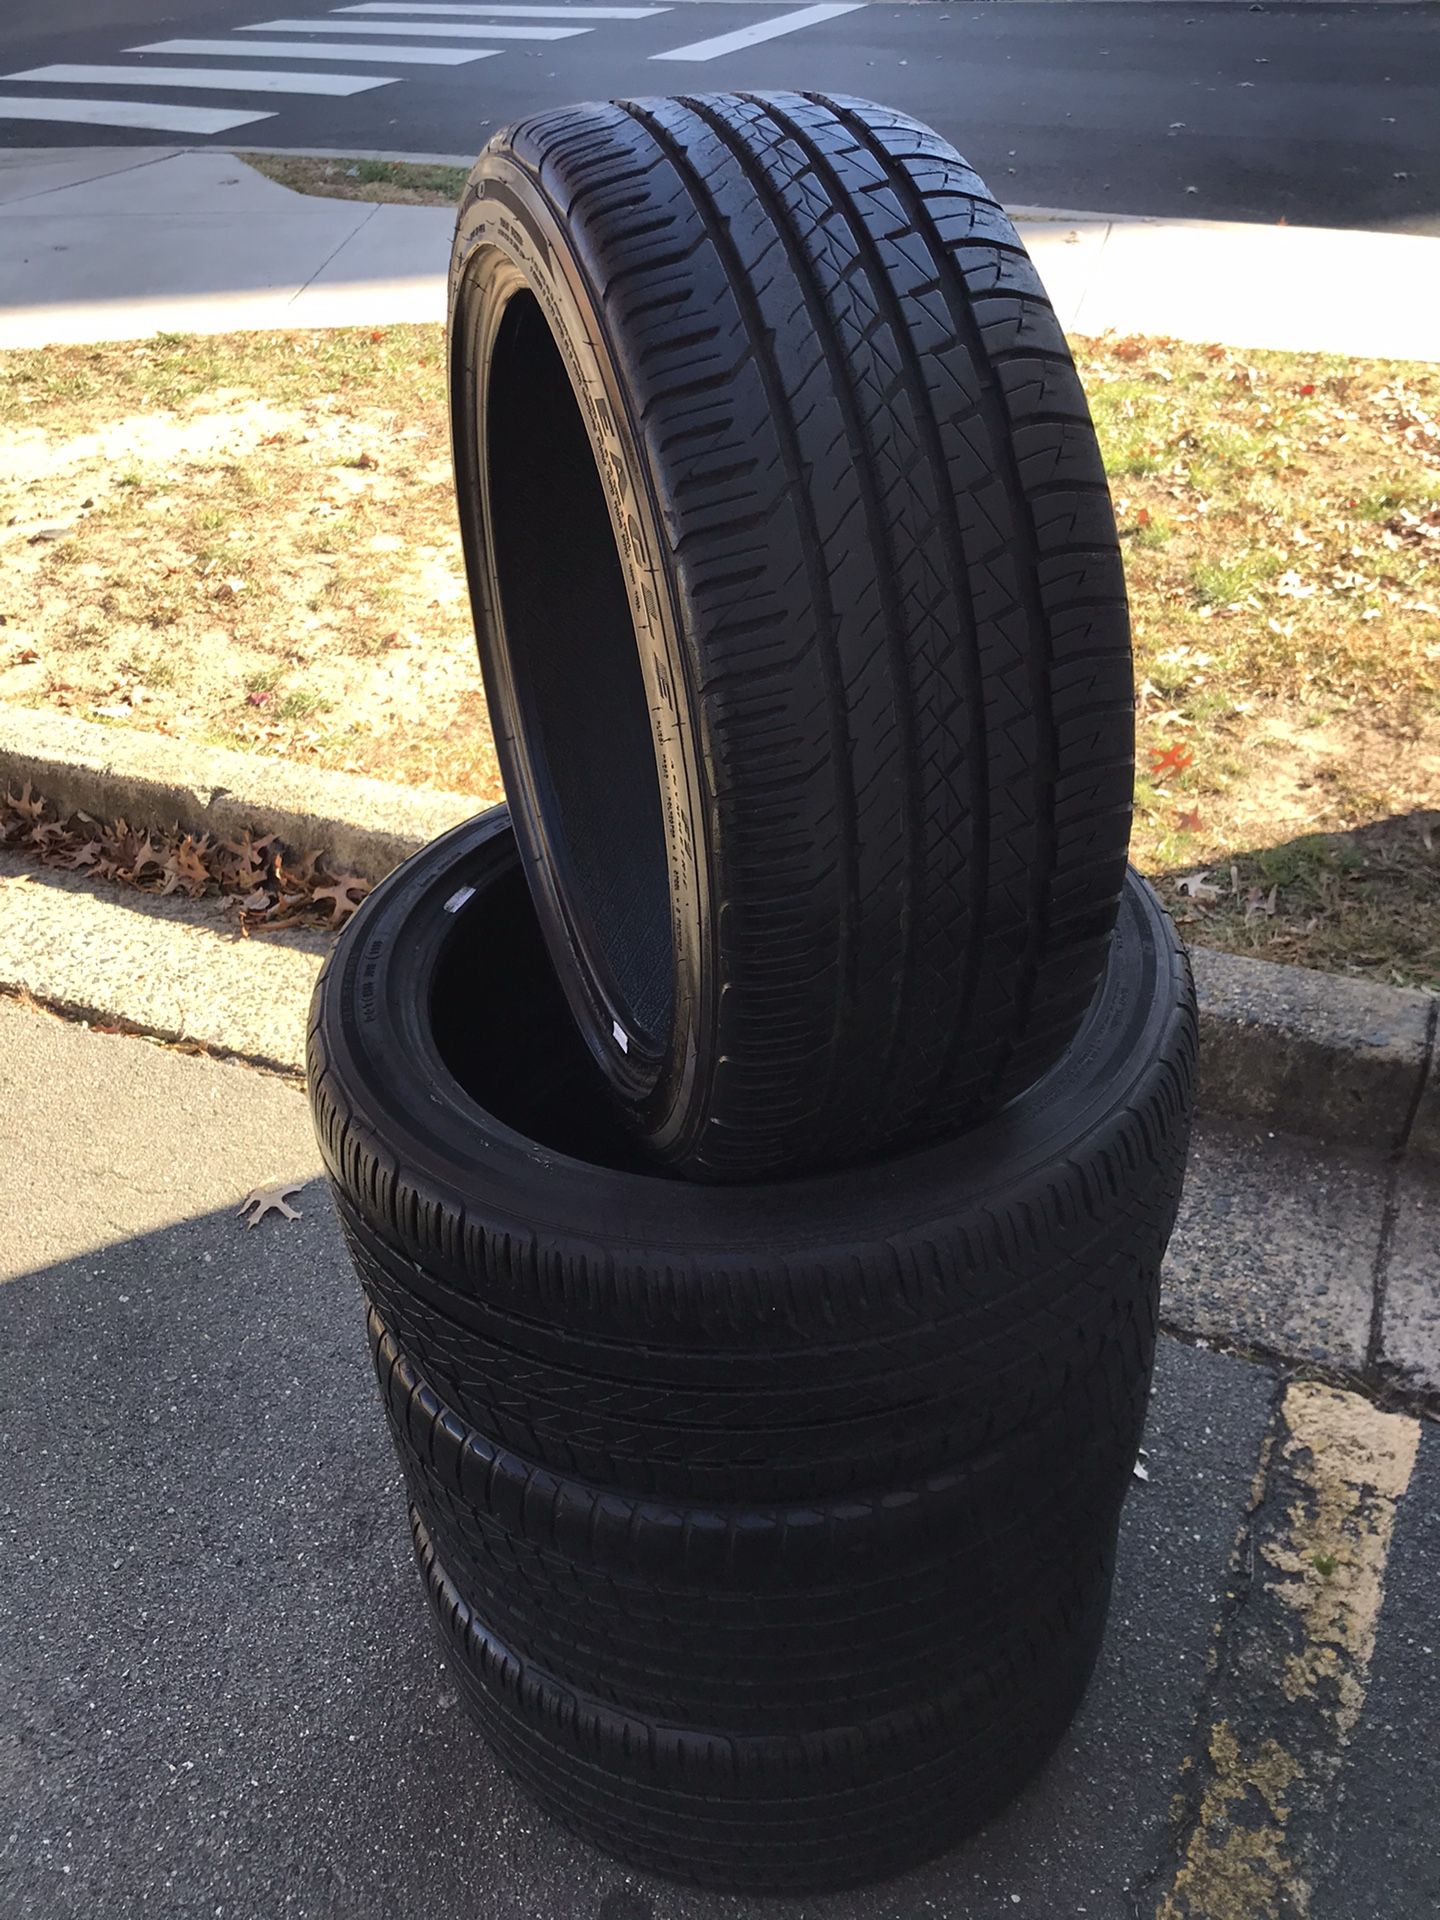 Tires for sale 19 inch Goodyear eagle f1 asymmetric with 7k miles on them